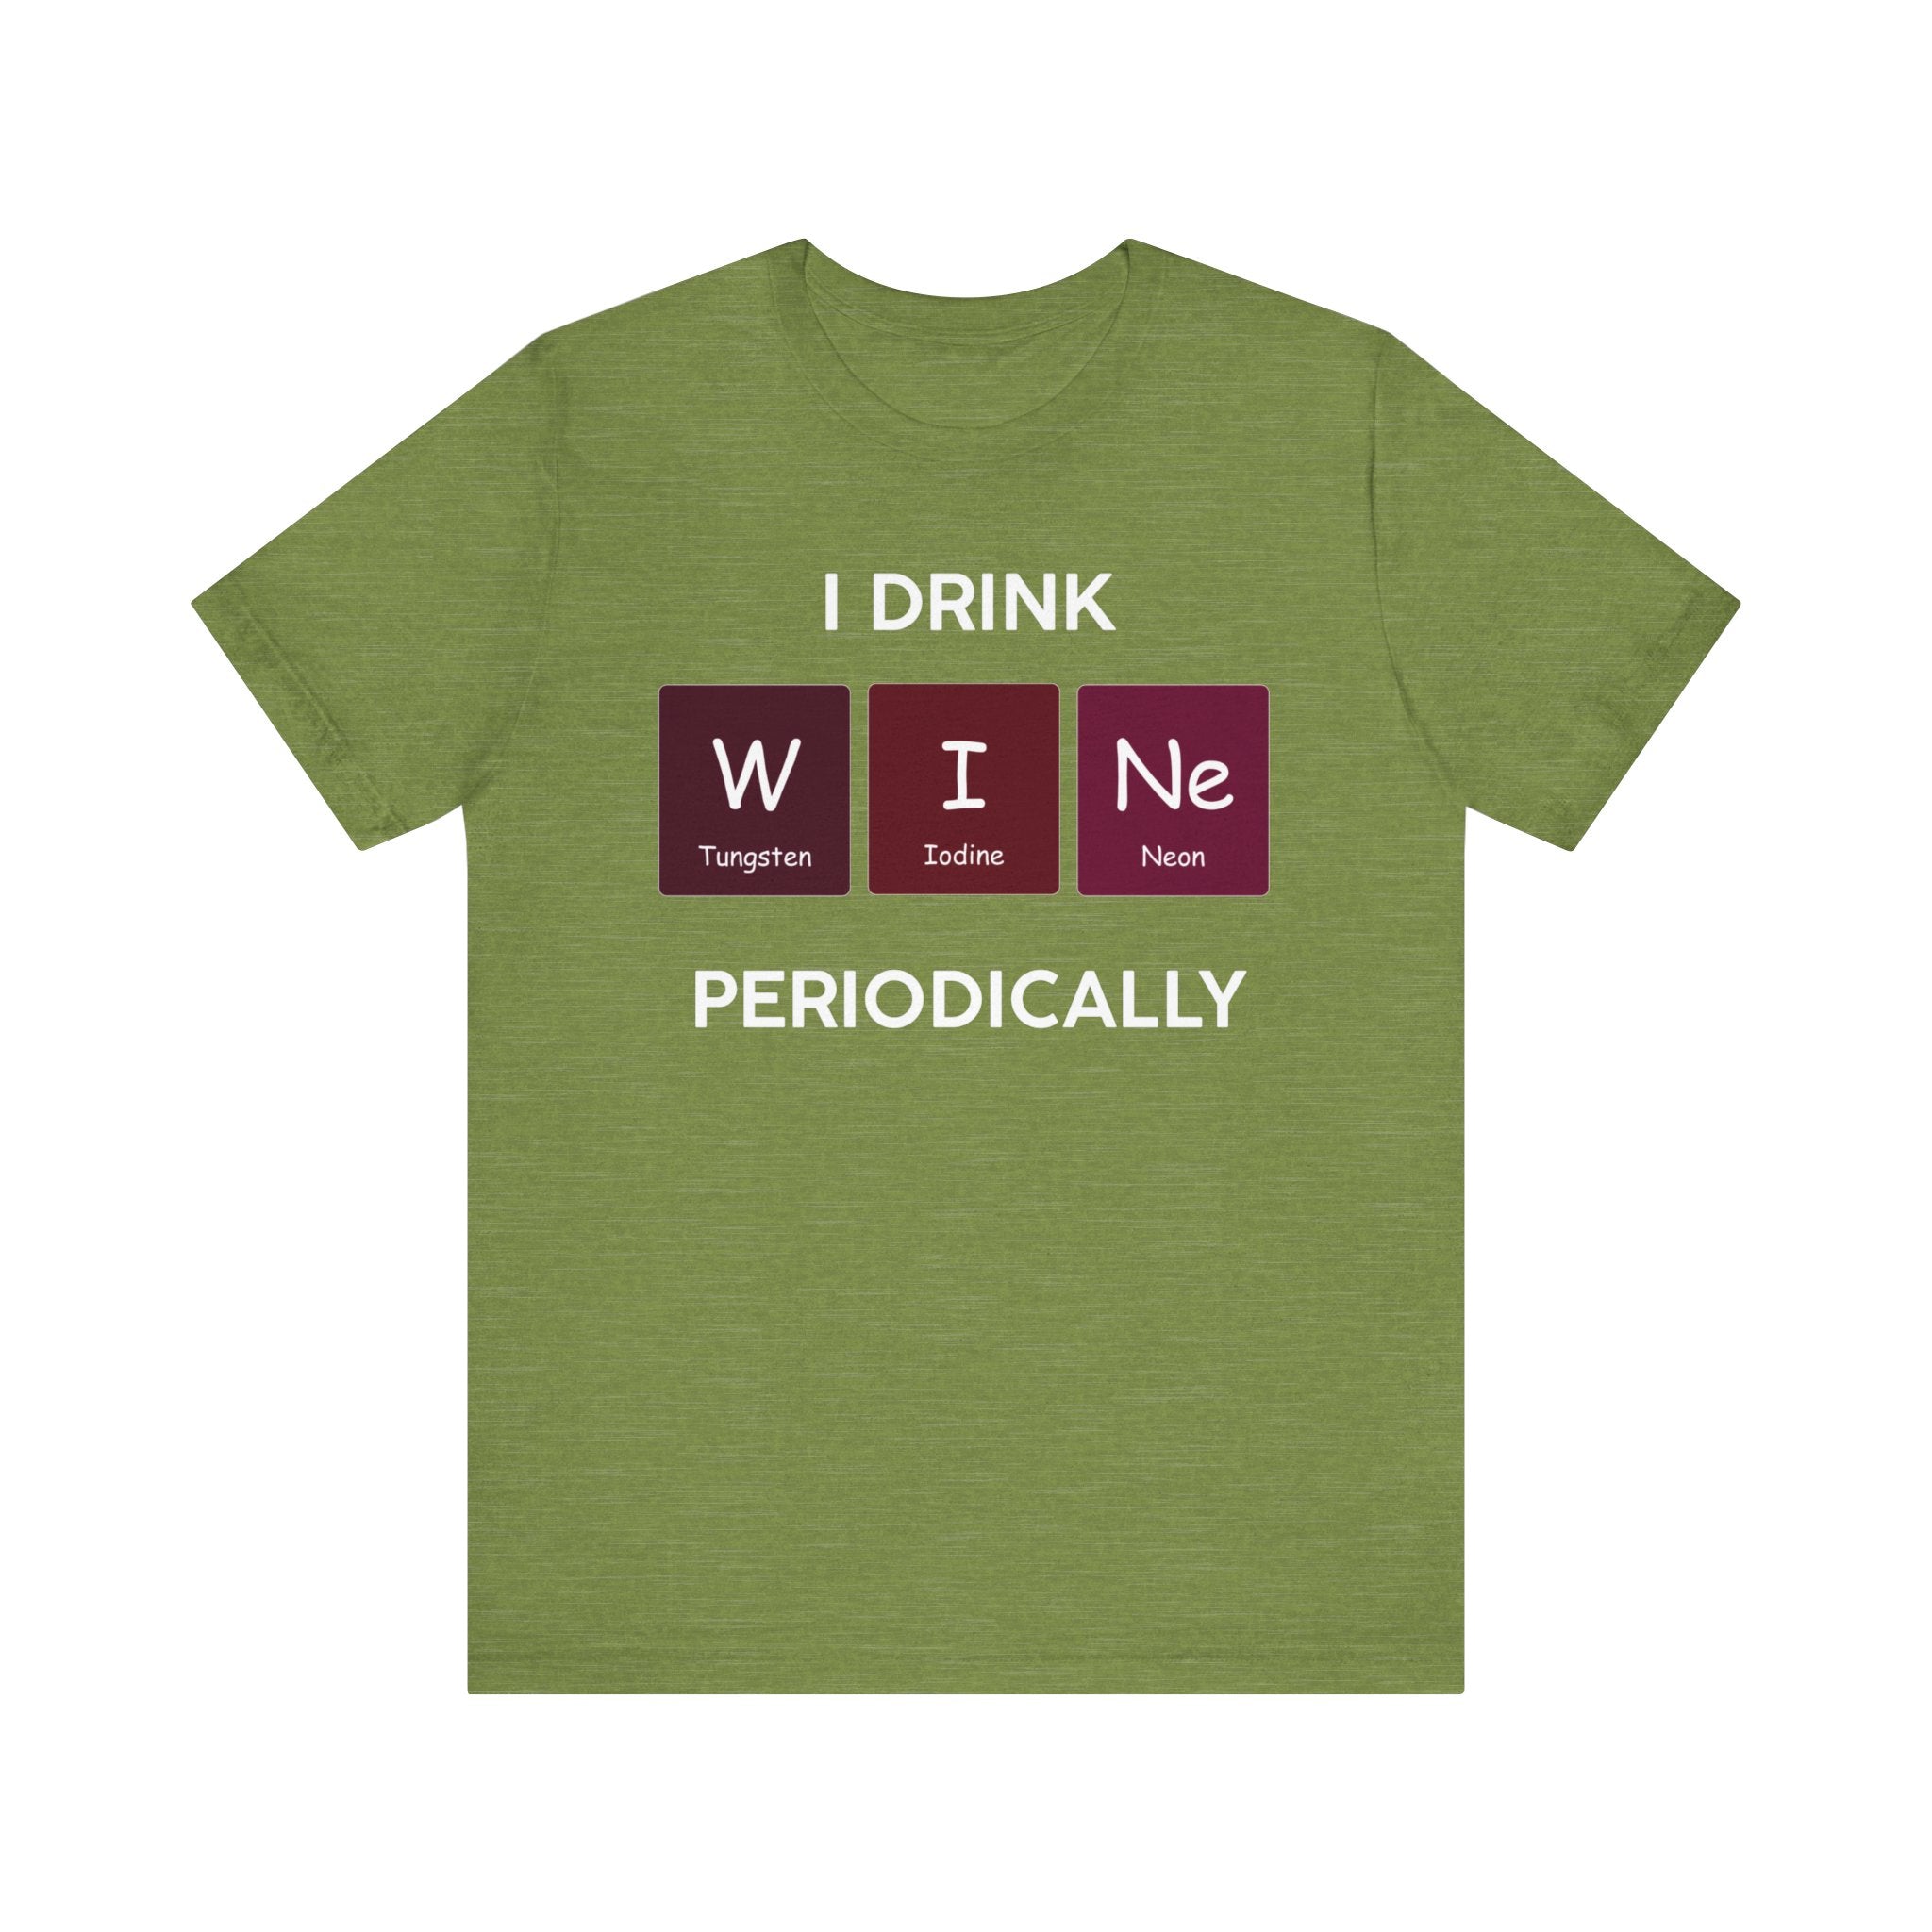 Unisex jersey tee with the text "I Drink W-I-Ne" featuring the elements tungsten (W), iodine (I), and neon (Ne) from the periodic table.